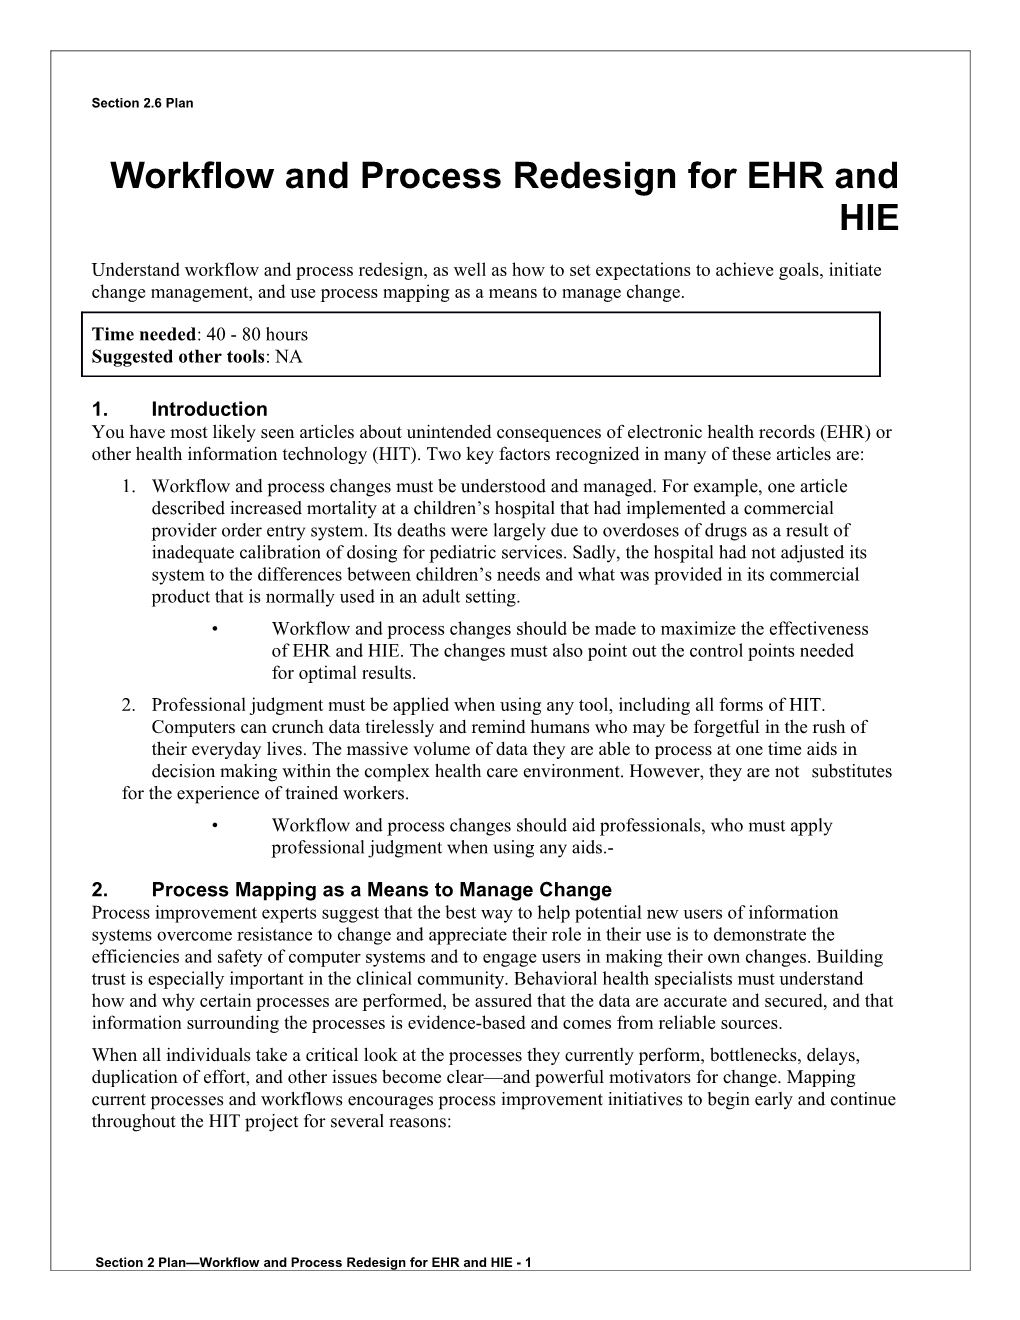 2 Workflow and Process Redesign for EHR and HIE